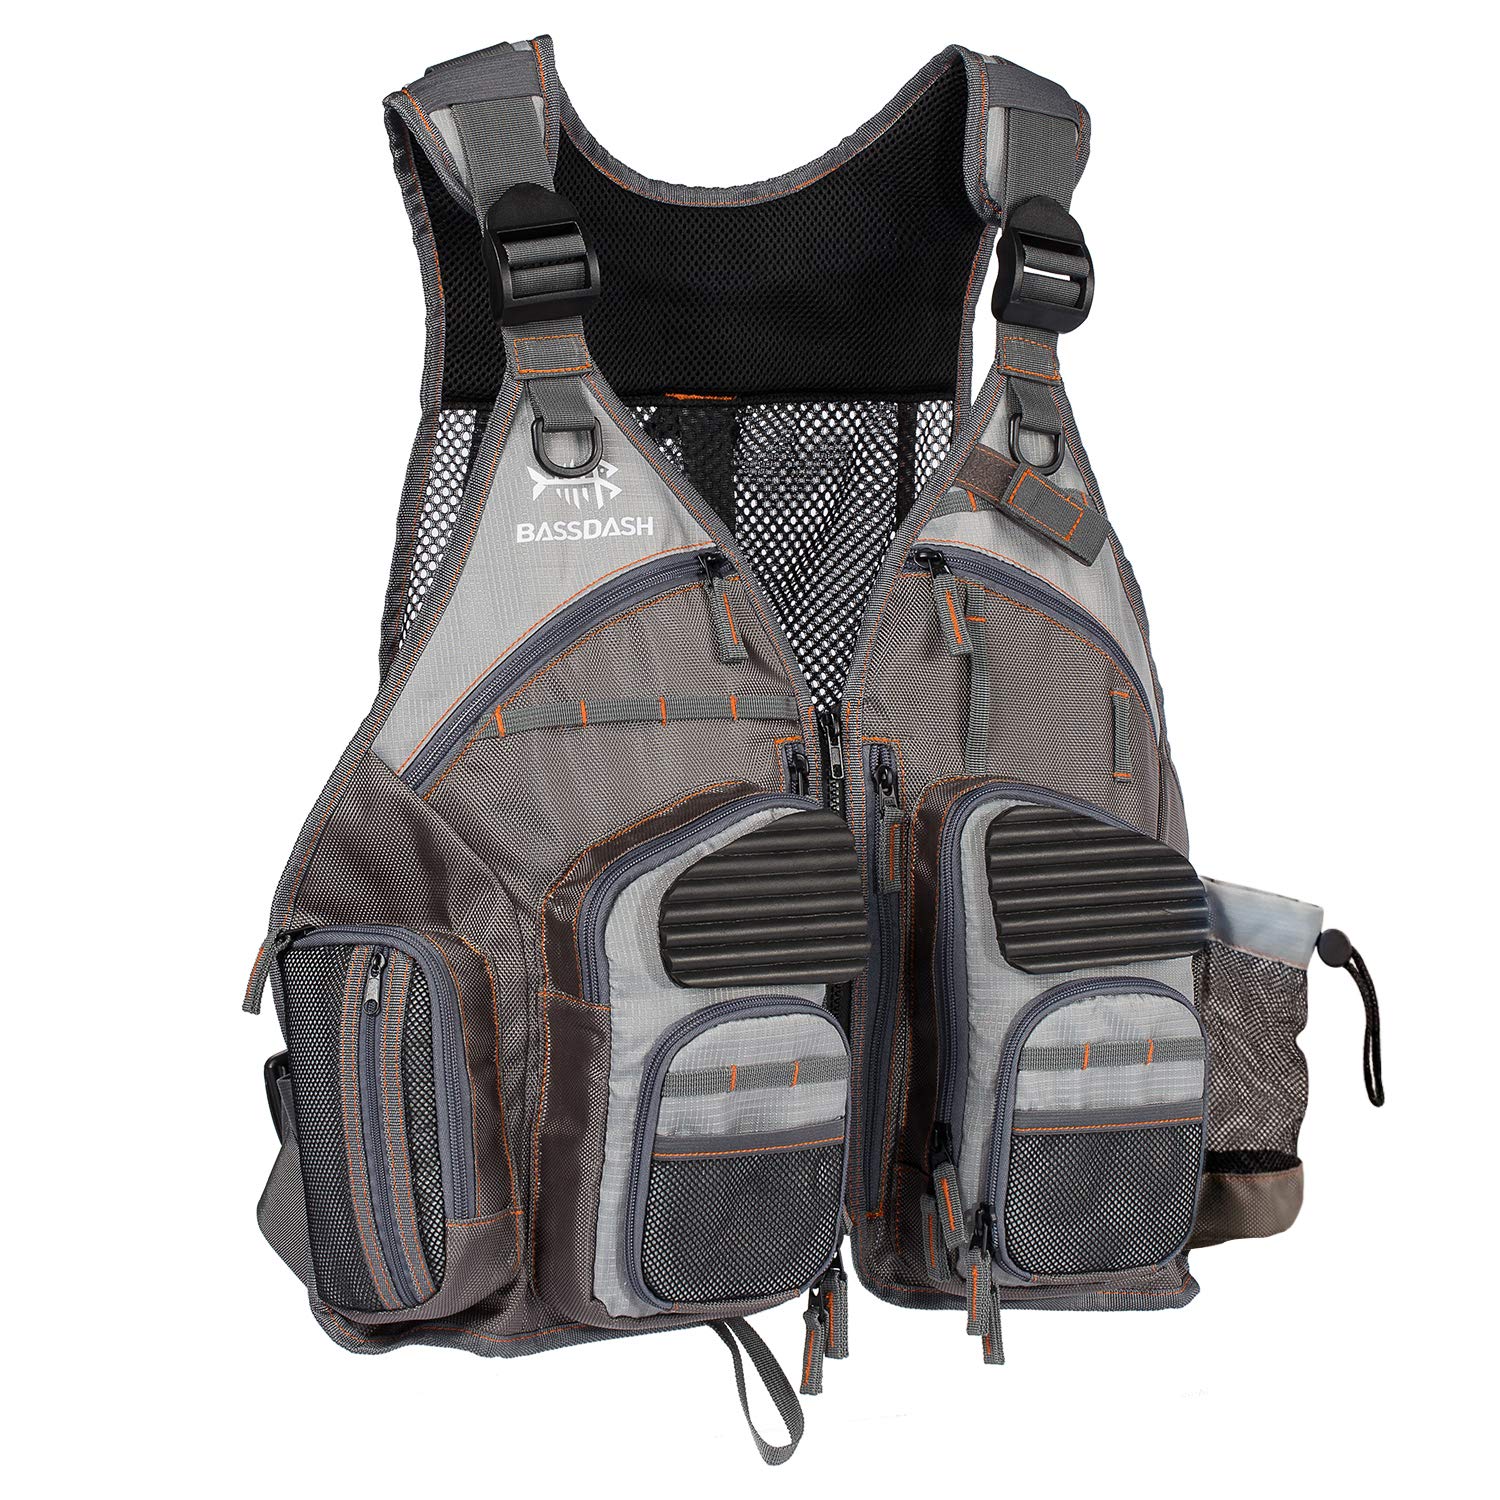 Adjustable Best Fishing Vest for Men and Women - Ideal for Fly Bass Fishing and Outdoor Activities